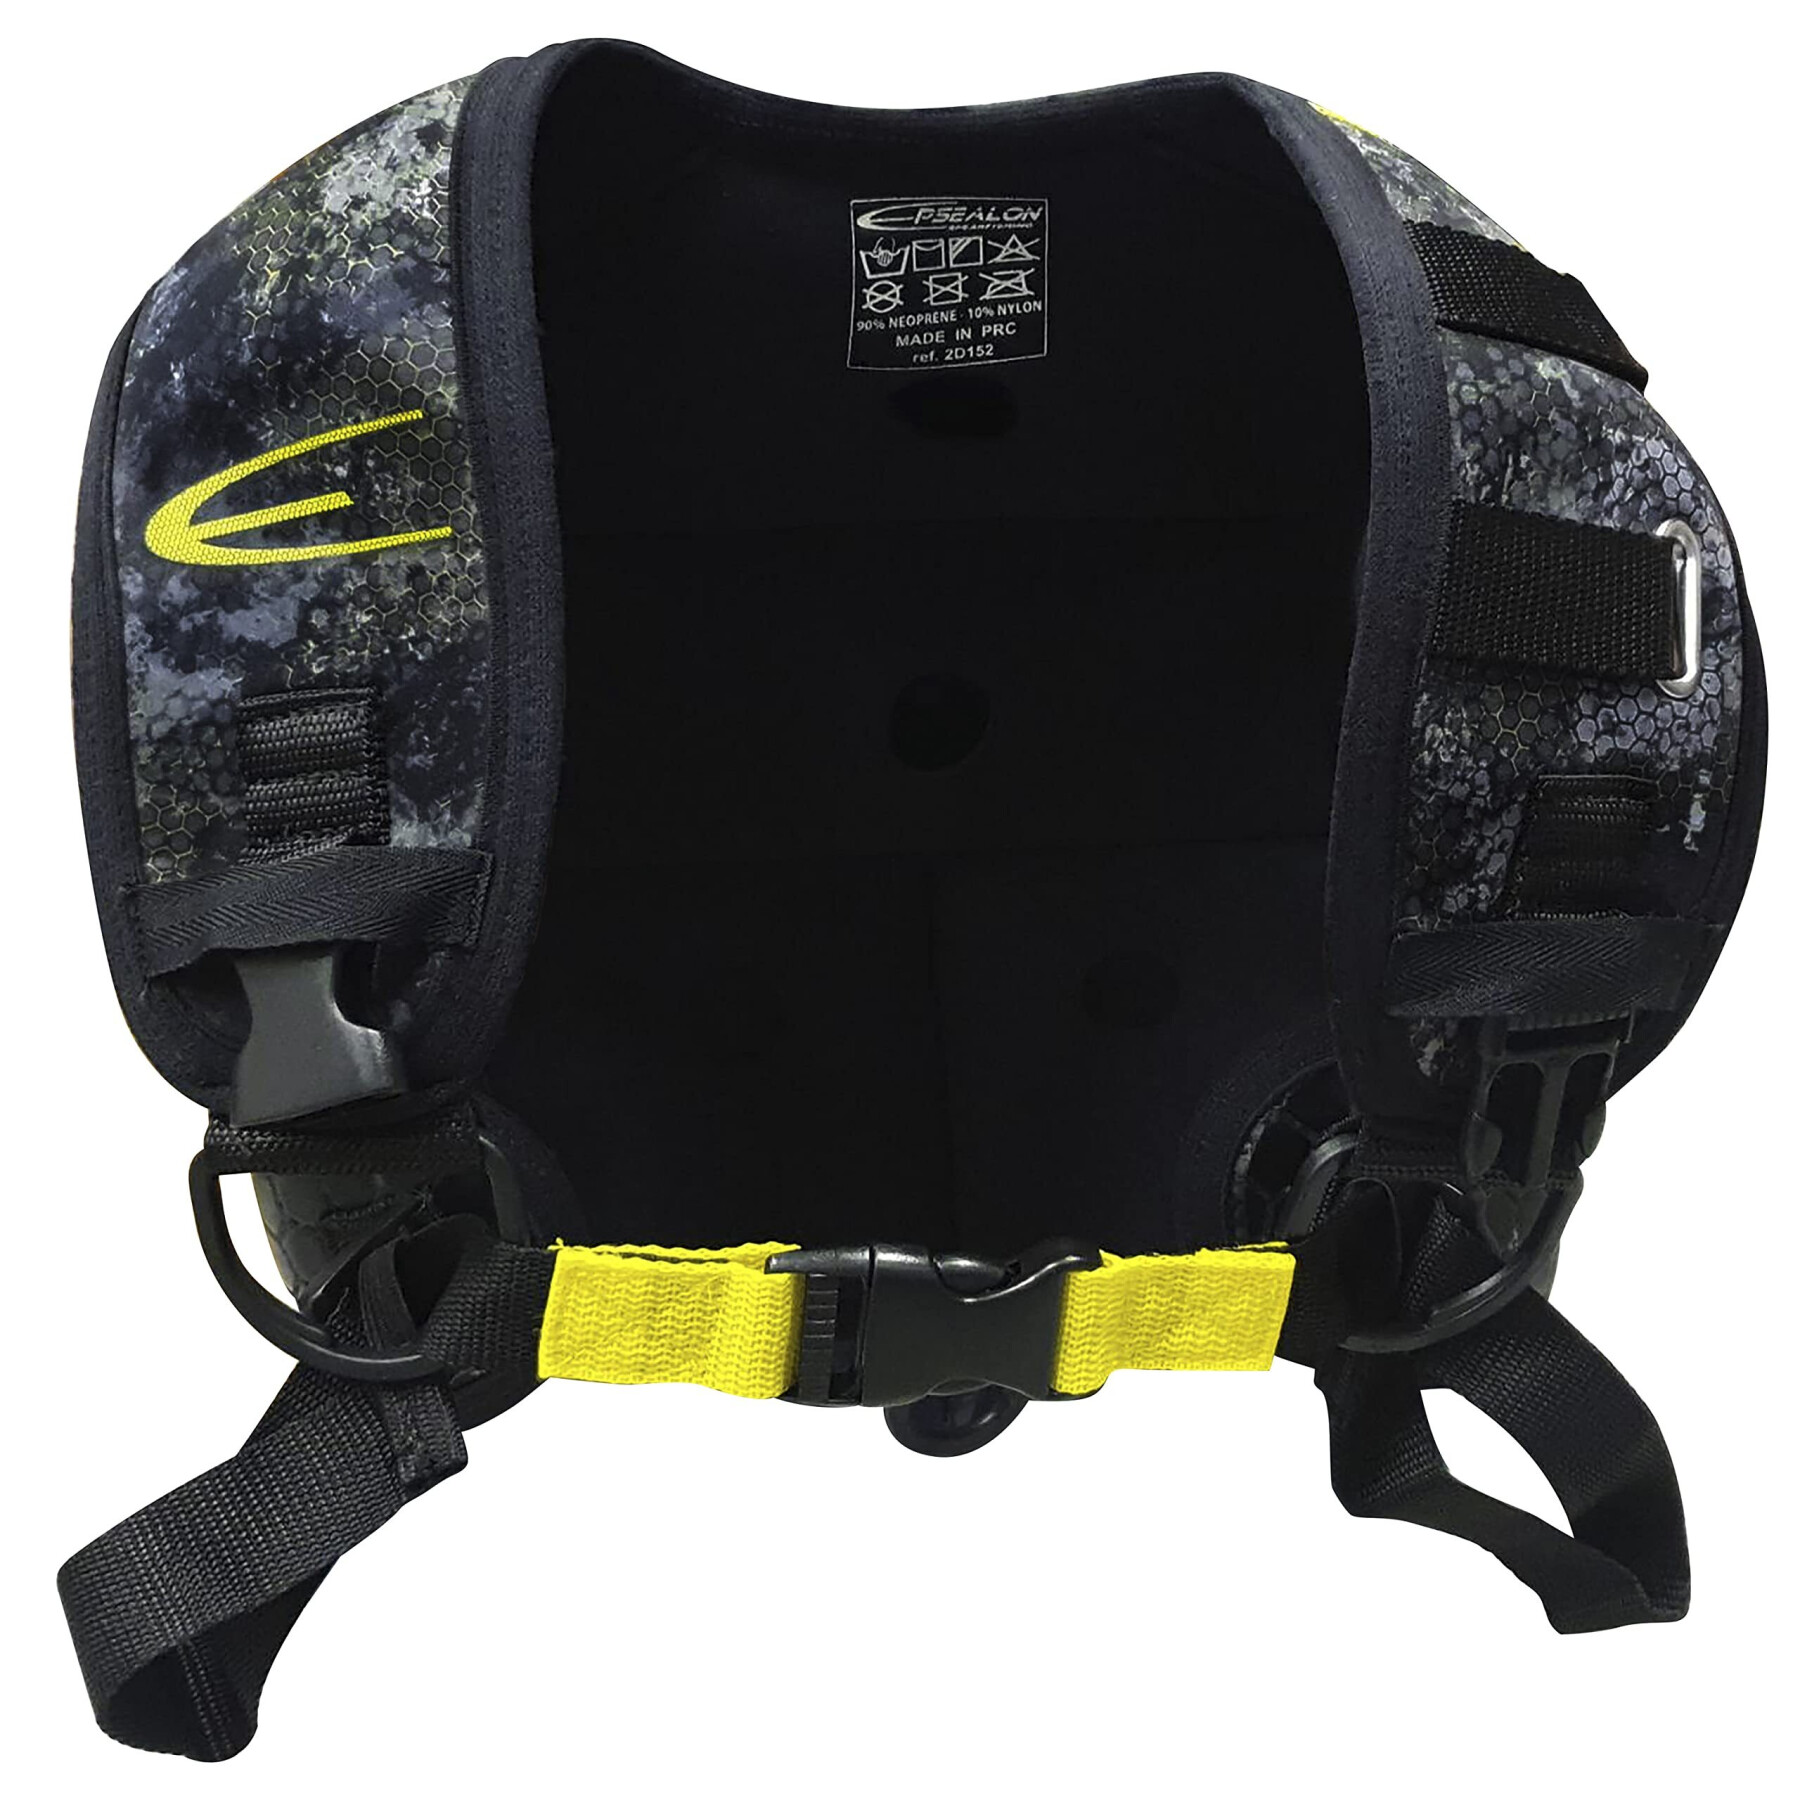 Diving harness Epsealon Tactical Stealth